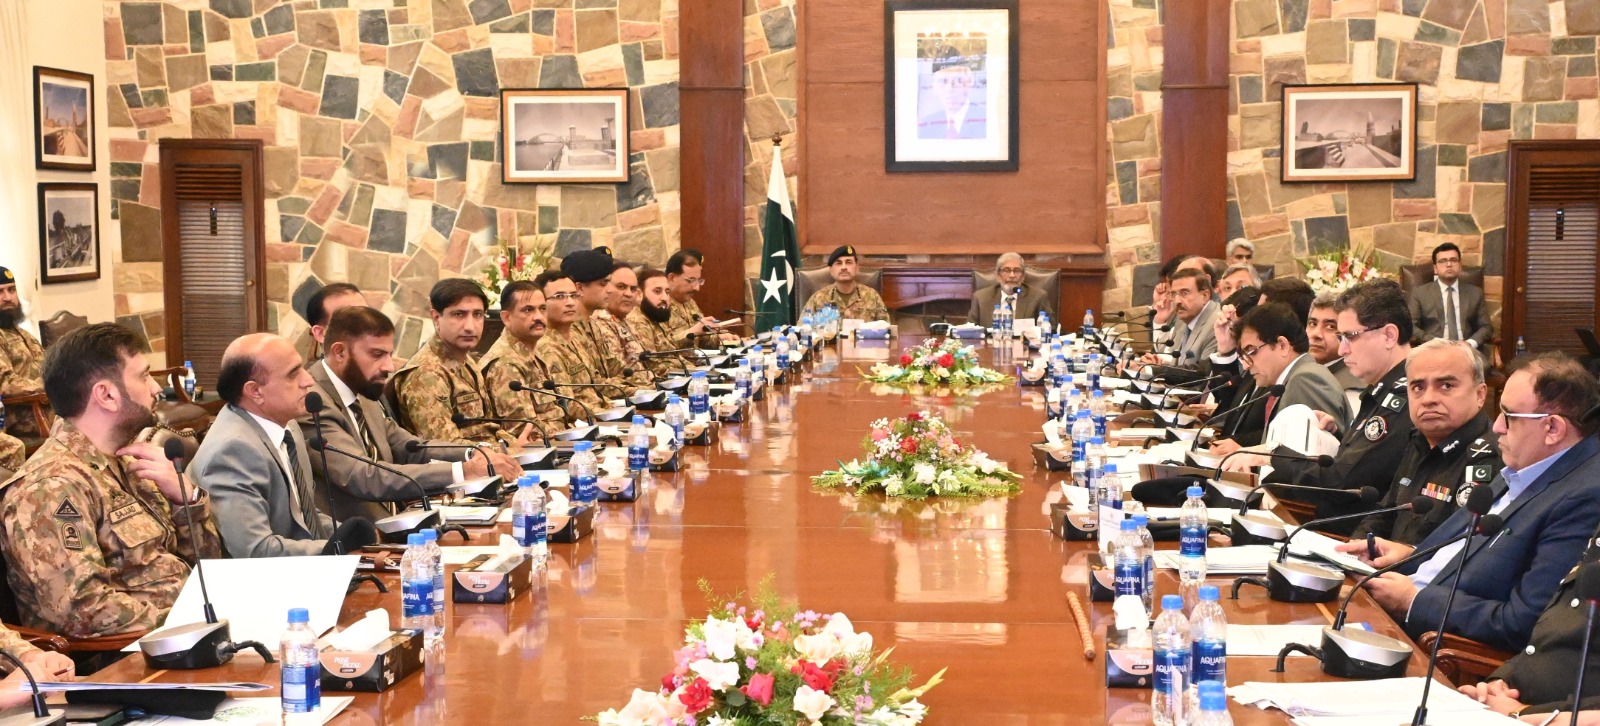 General Syed Asim Munir, NI (M), (COAS) visited Karachi today and attended meeting of the Provincial Apex Committee.